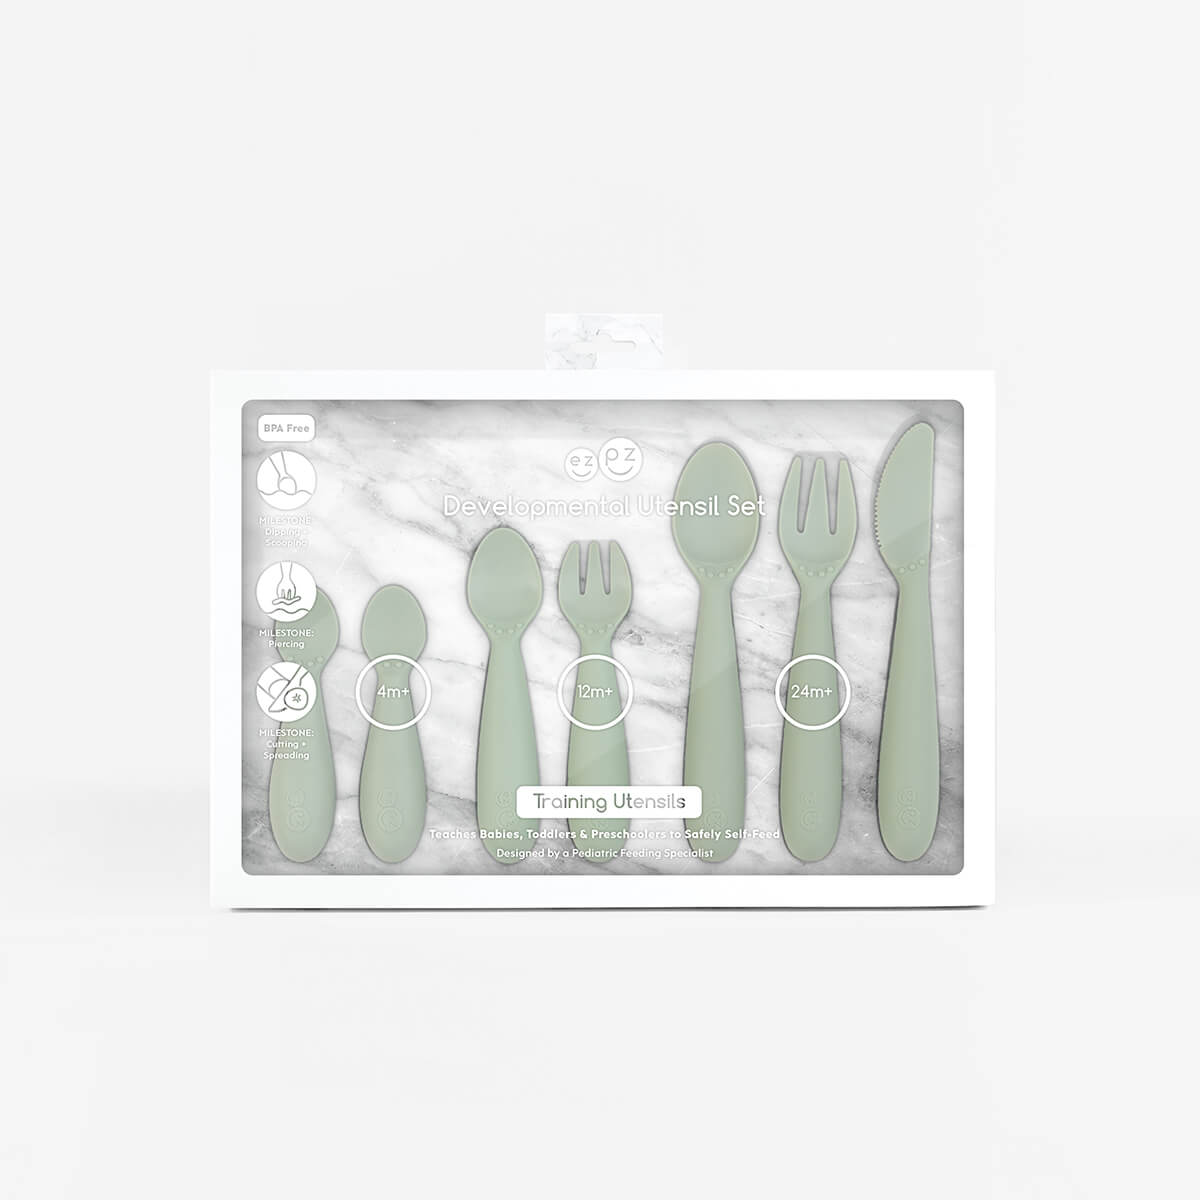 The Best Baby Utensils for BLW - What Features To Look For? – eztotz